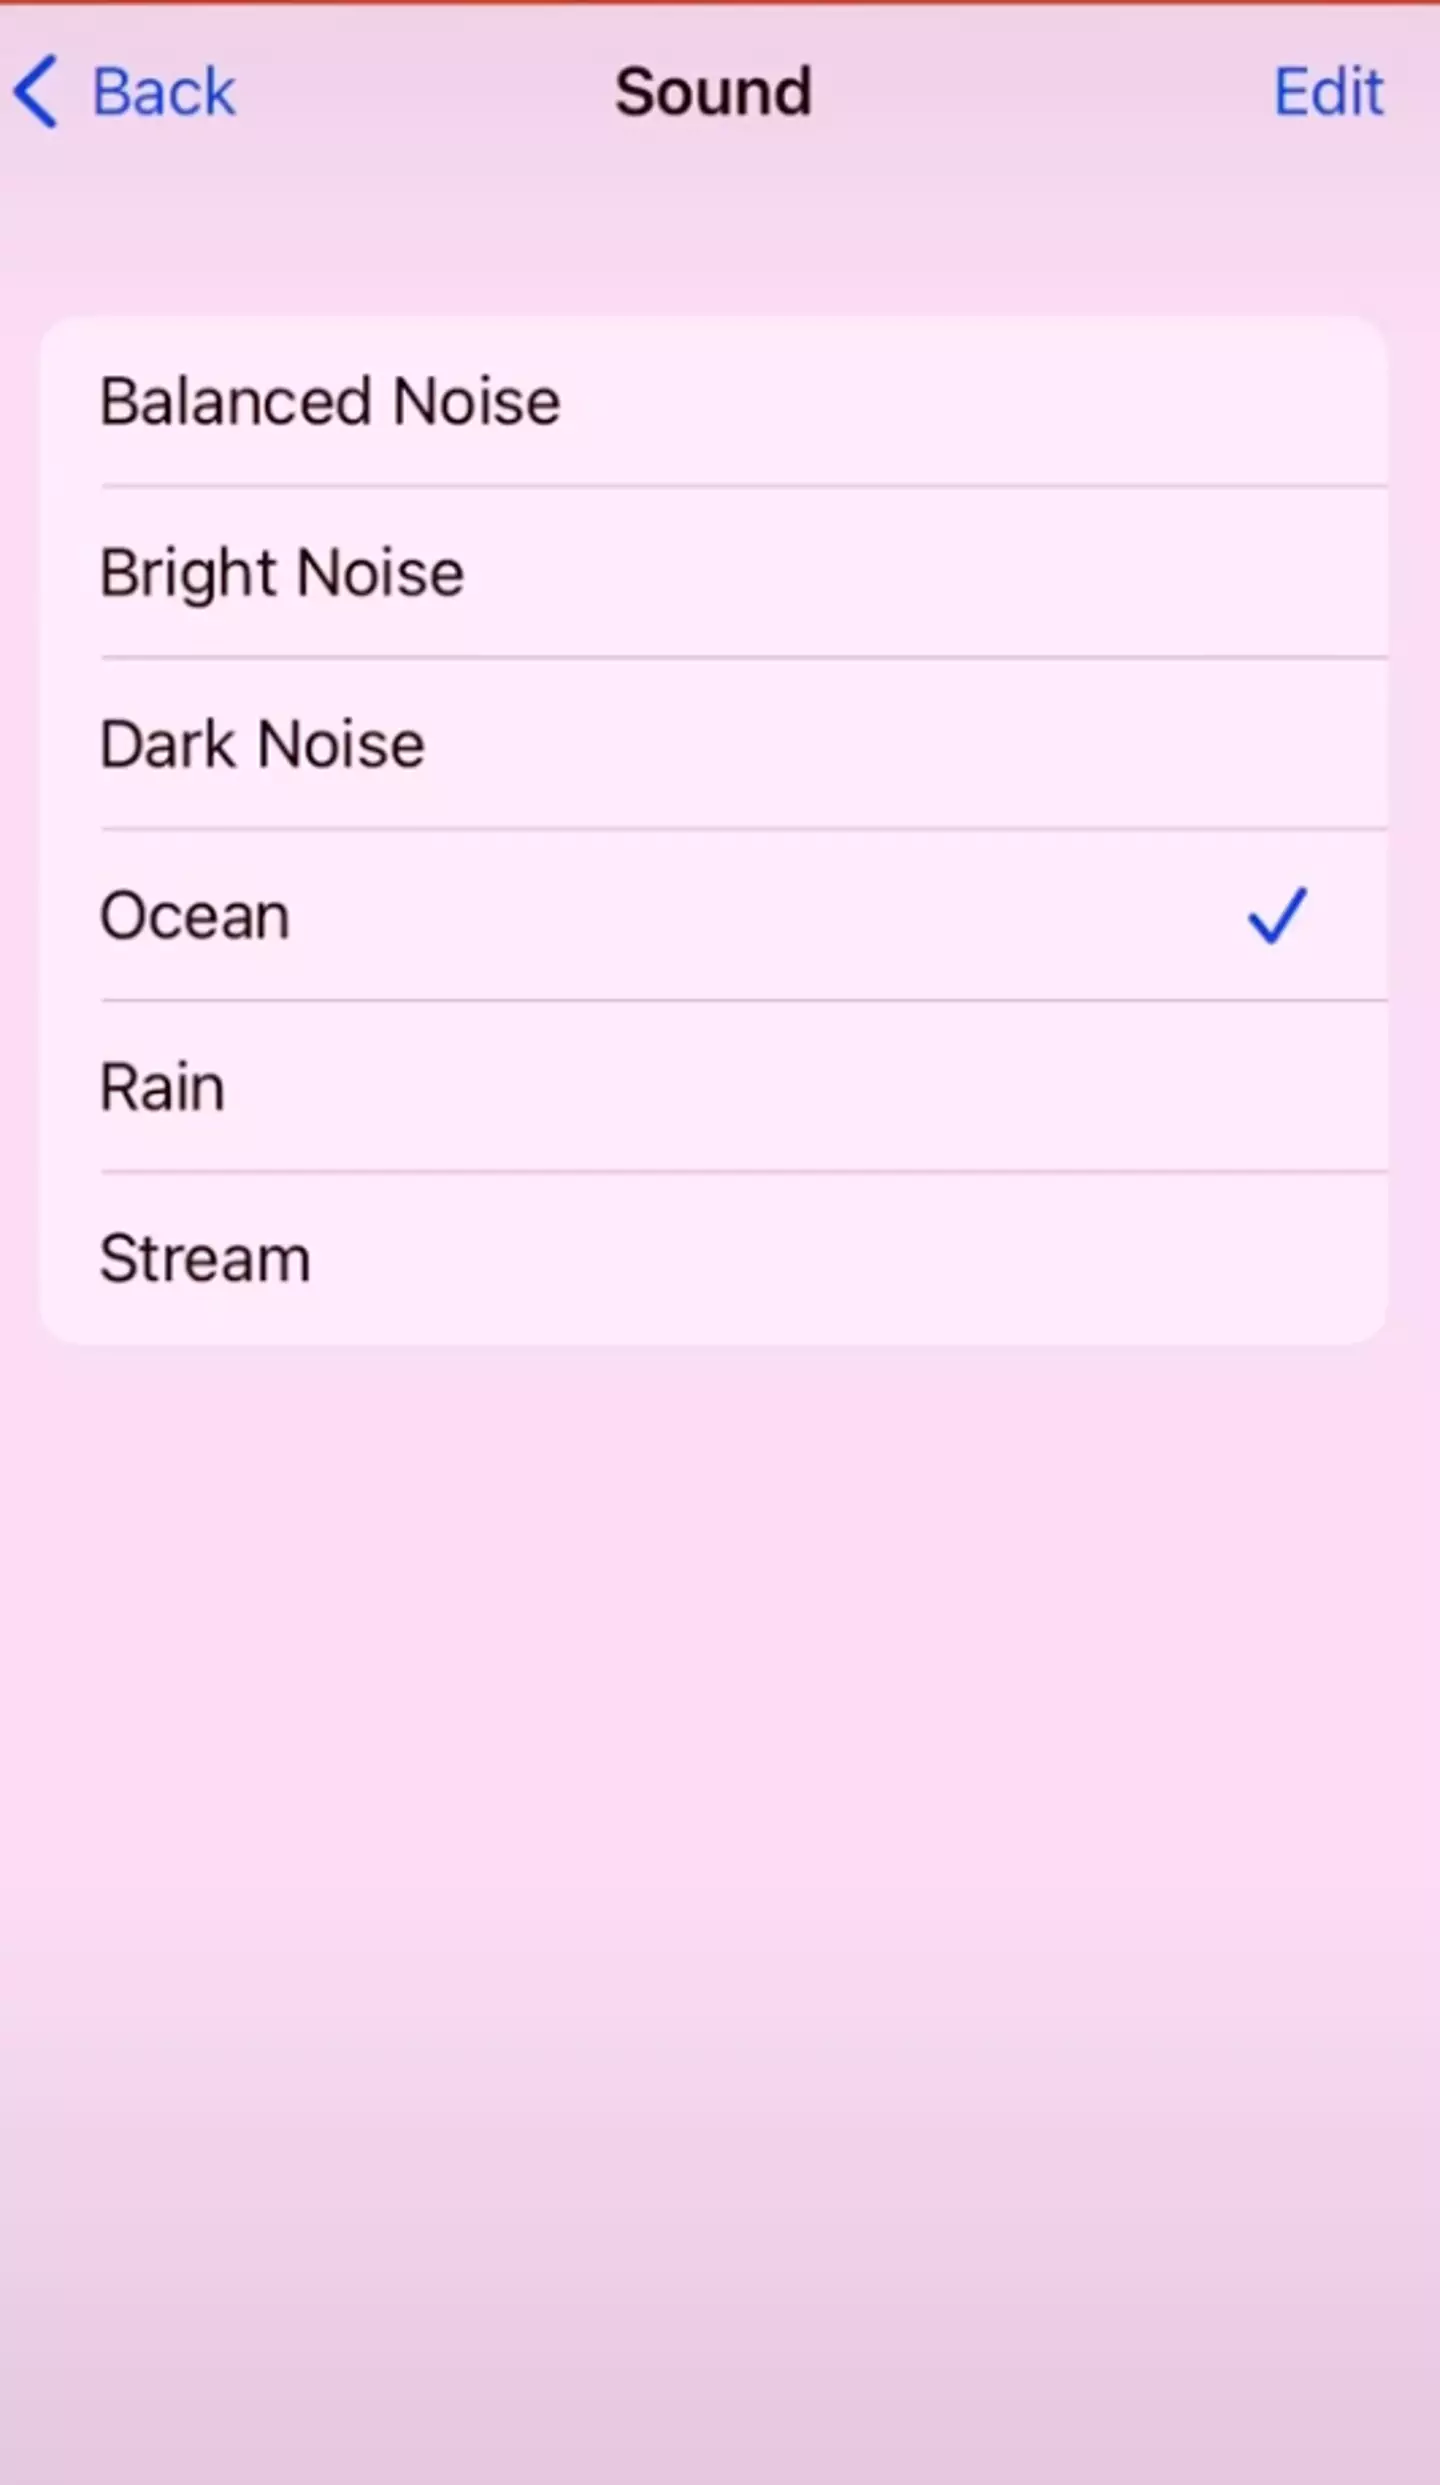 There are a few different white noise sounds to choose from.